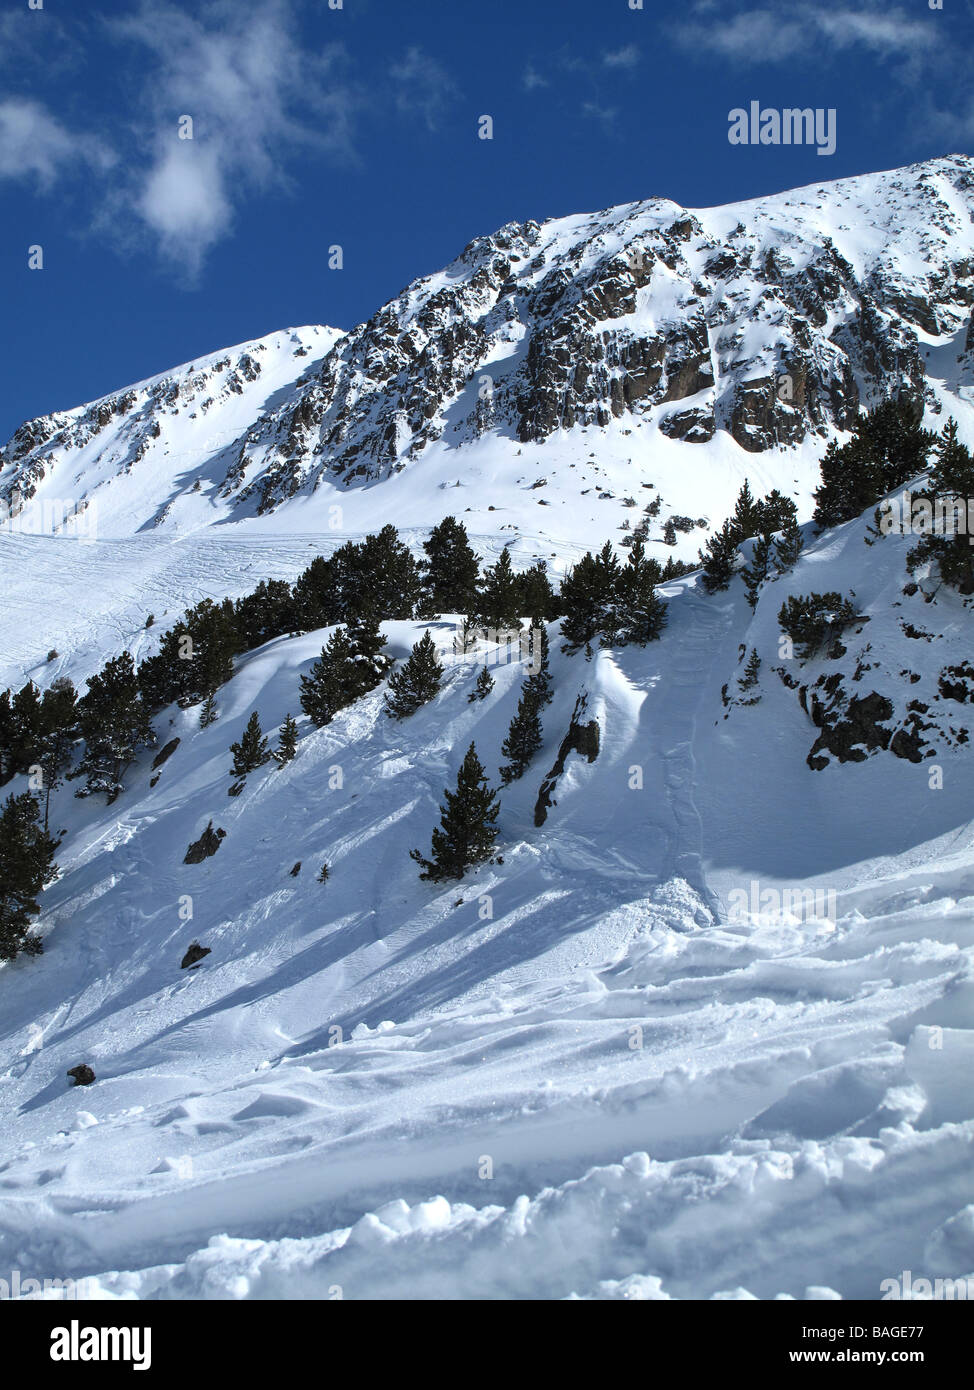 A snowy view of the pyrenees in andorra Stock Photo